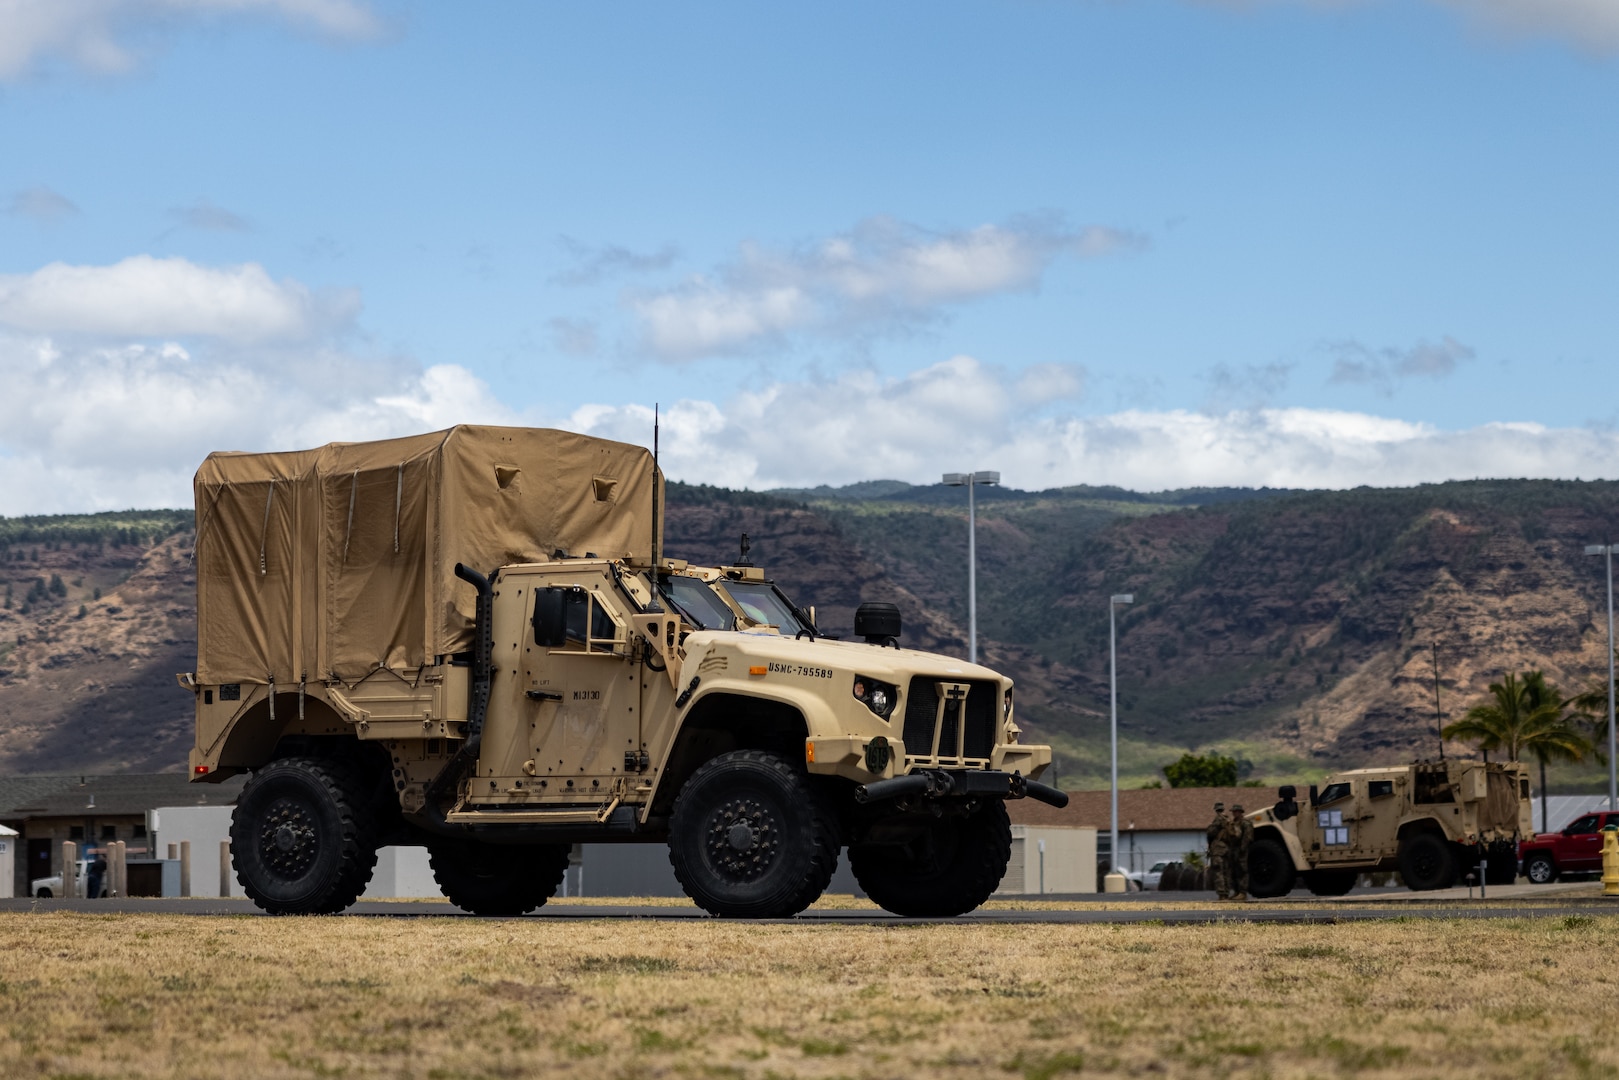 U.S. Marines with 3d Marine Littoral Regiment, 3d Marine Division, stage a High Mobility Multipurpose Wheeled Vehicle during Force Design Integration Exercise at Pacific Missile Range Facility, Barking Sands, Hawaii, Sept. 26, 2023. Force Design Integration Exercise demonstrates the current capabilities of 3d MLR as an effective part of the Stand-In Force integrated with our Pacific Marines and Joint counterparts. Through the demonstration of Force Design 2030-enabled capabilities, 3d MLR showcases the implementation of technology, doctrine, and policy initiatives to allow the SiF to sense and make-sense of potential adversaries, seize and hold key maritime terrain, and conduct reconnaissance and counter-reconnaissance.  (U.S. Marine Corps photo by Lance Cpl. Malia Sparks)